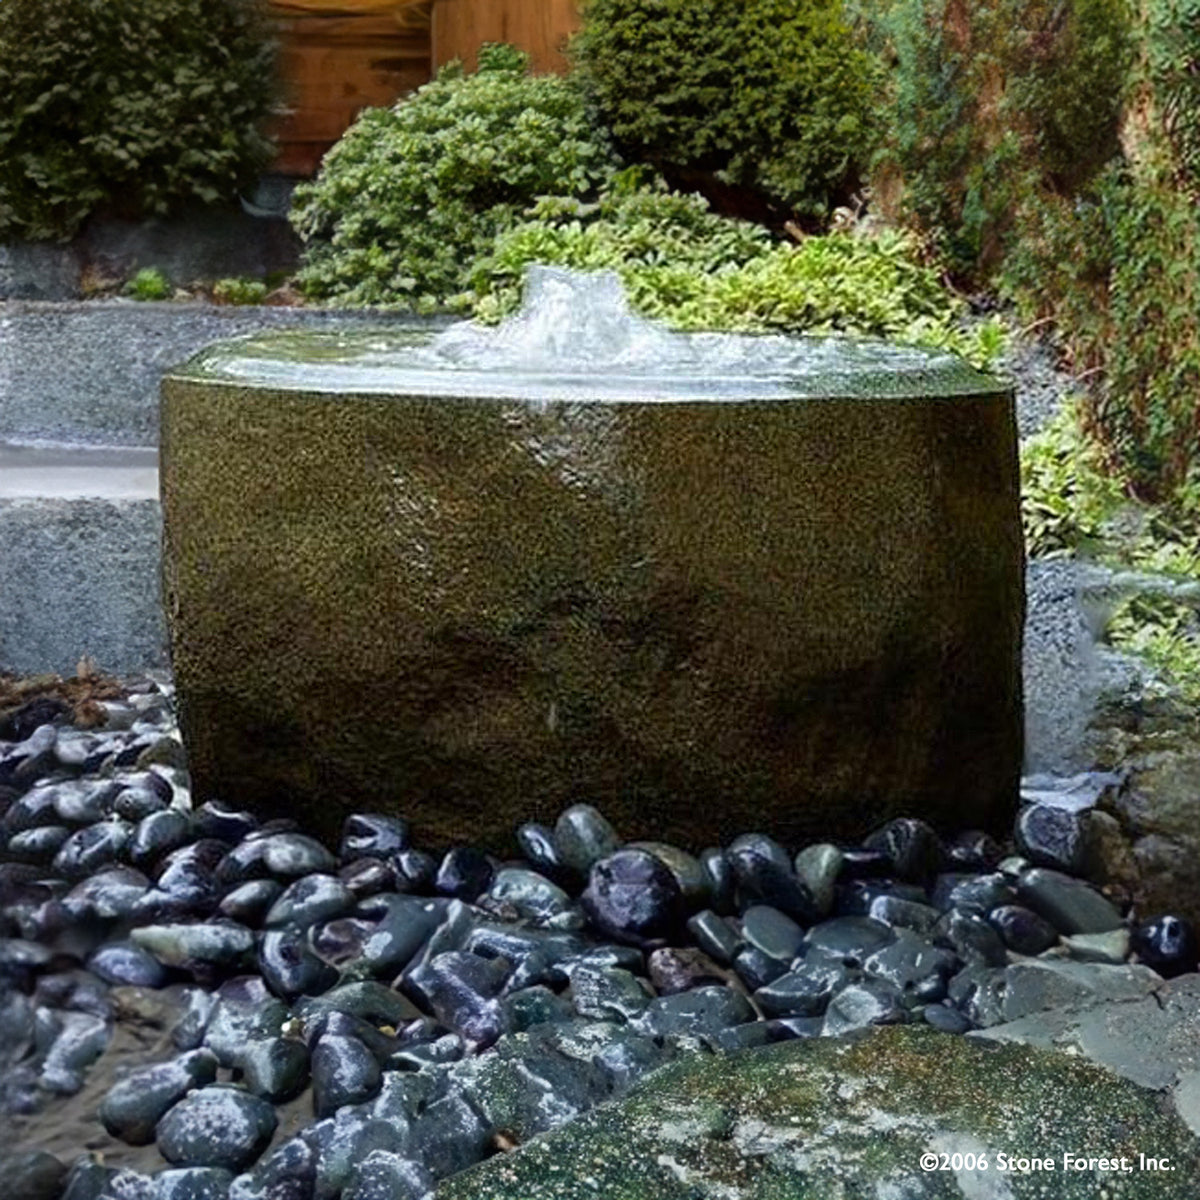 Stone Forest Hand Carved Edo garden fountain made from a granite boulder image 5 of 5